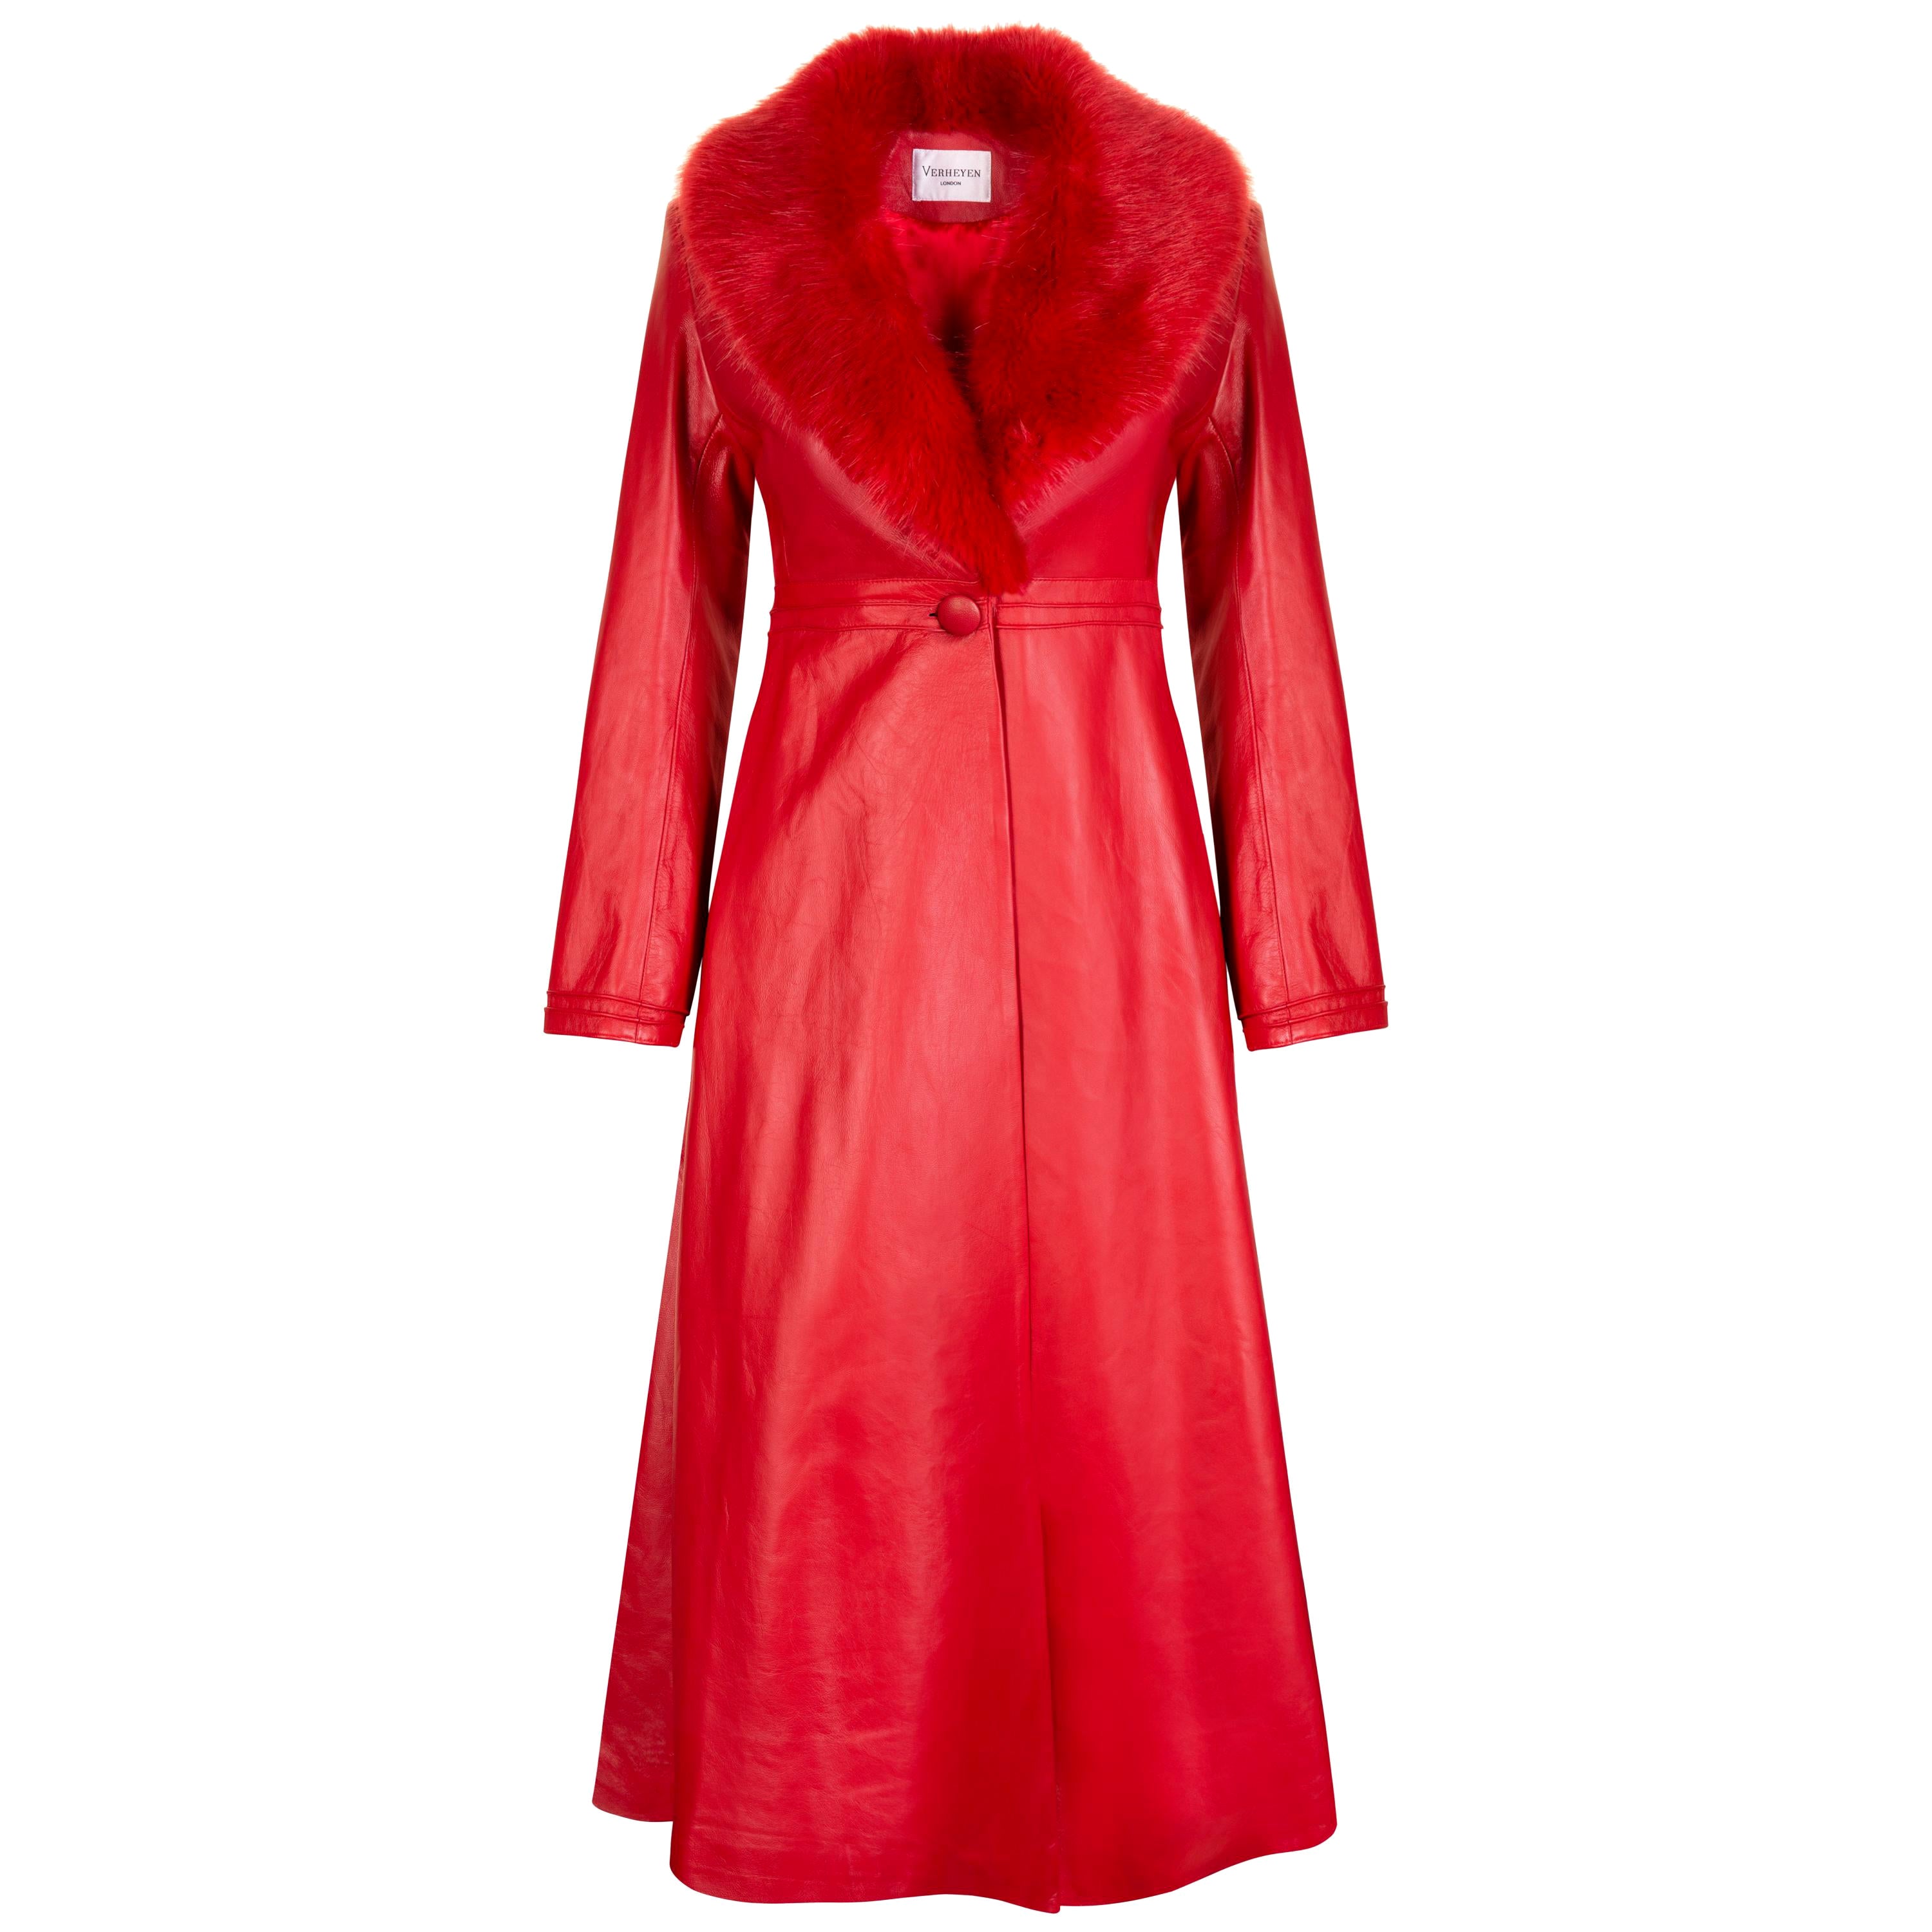 Verheyen London Edward Leather Coat with Faux Fur Collar in Red - Size uk 10 For Sale